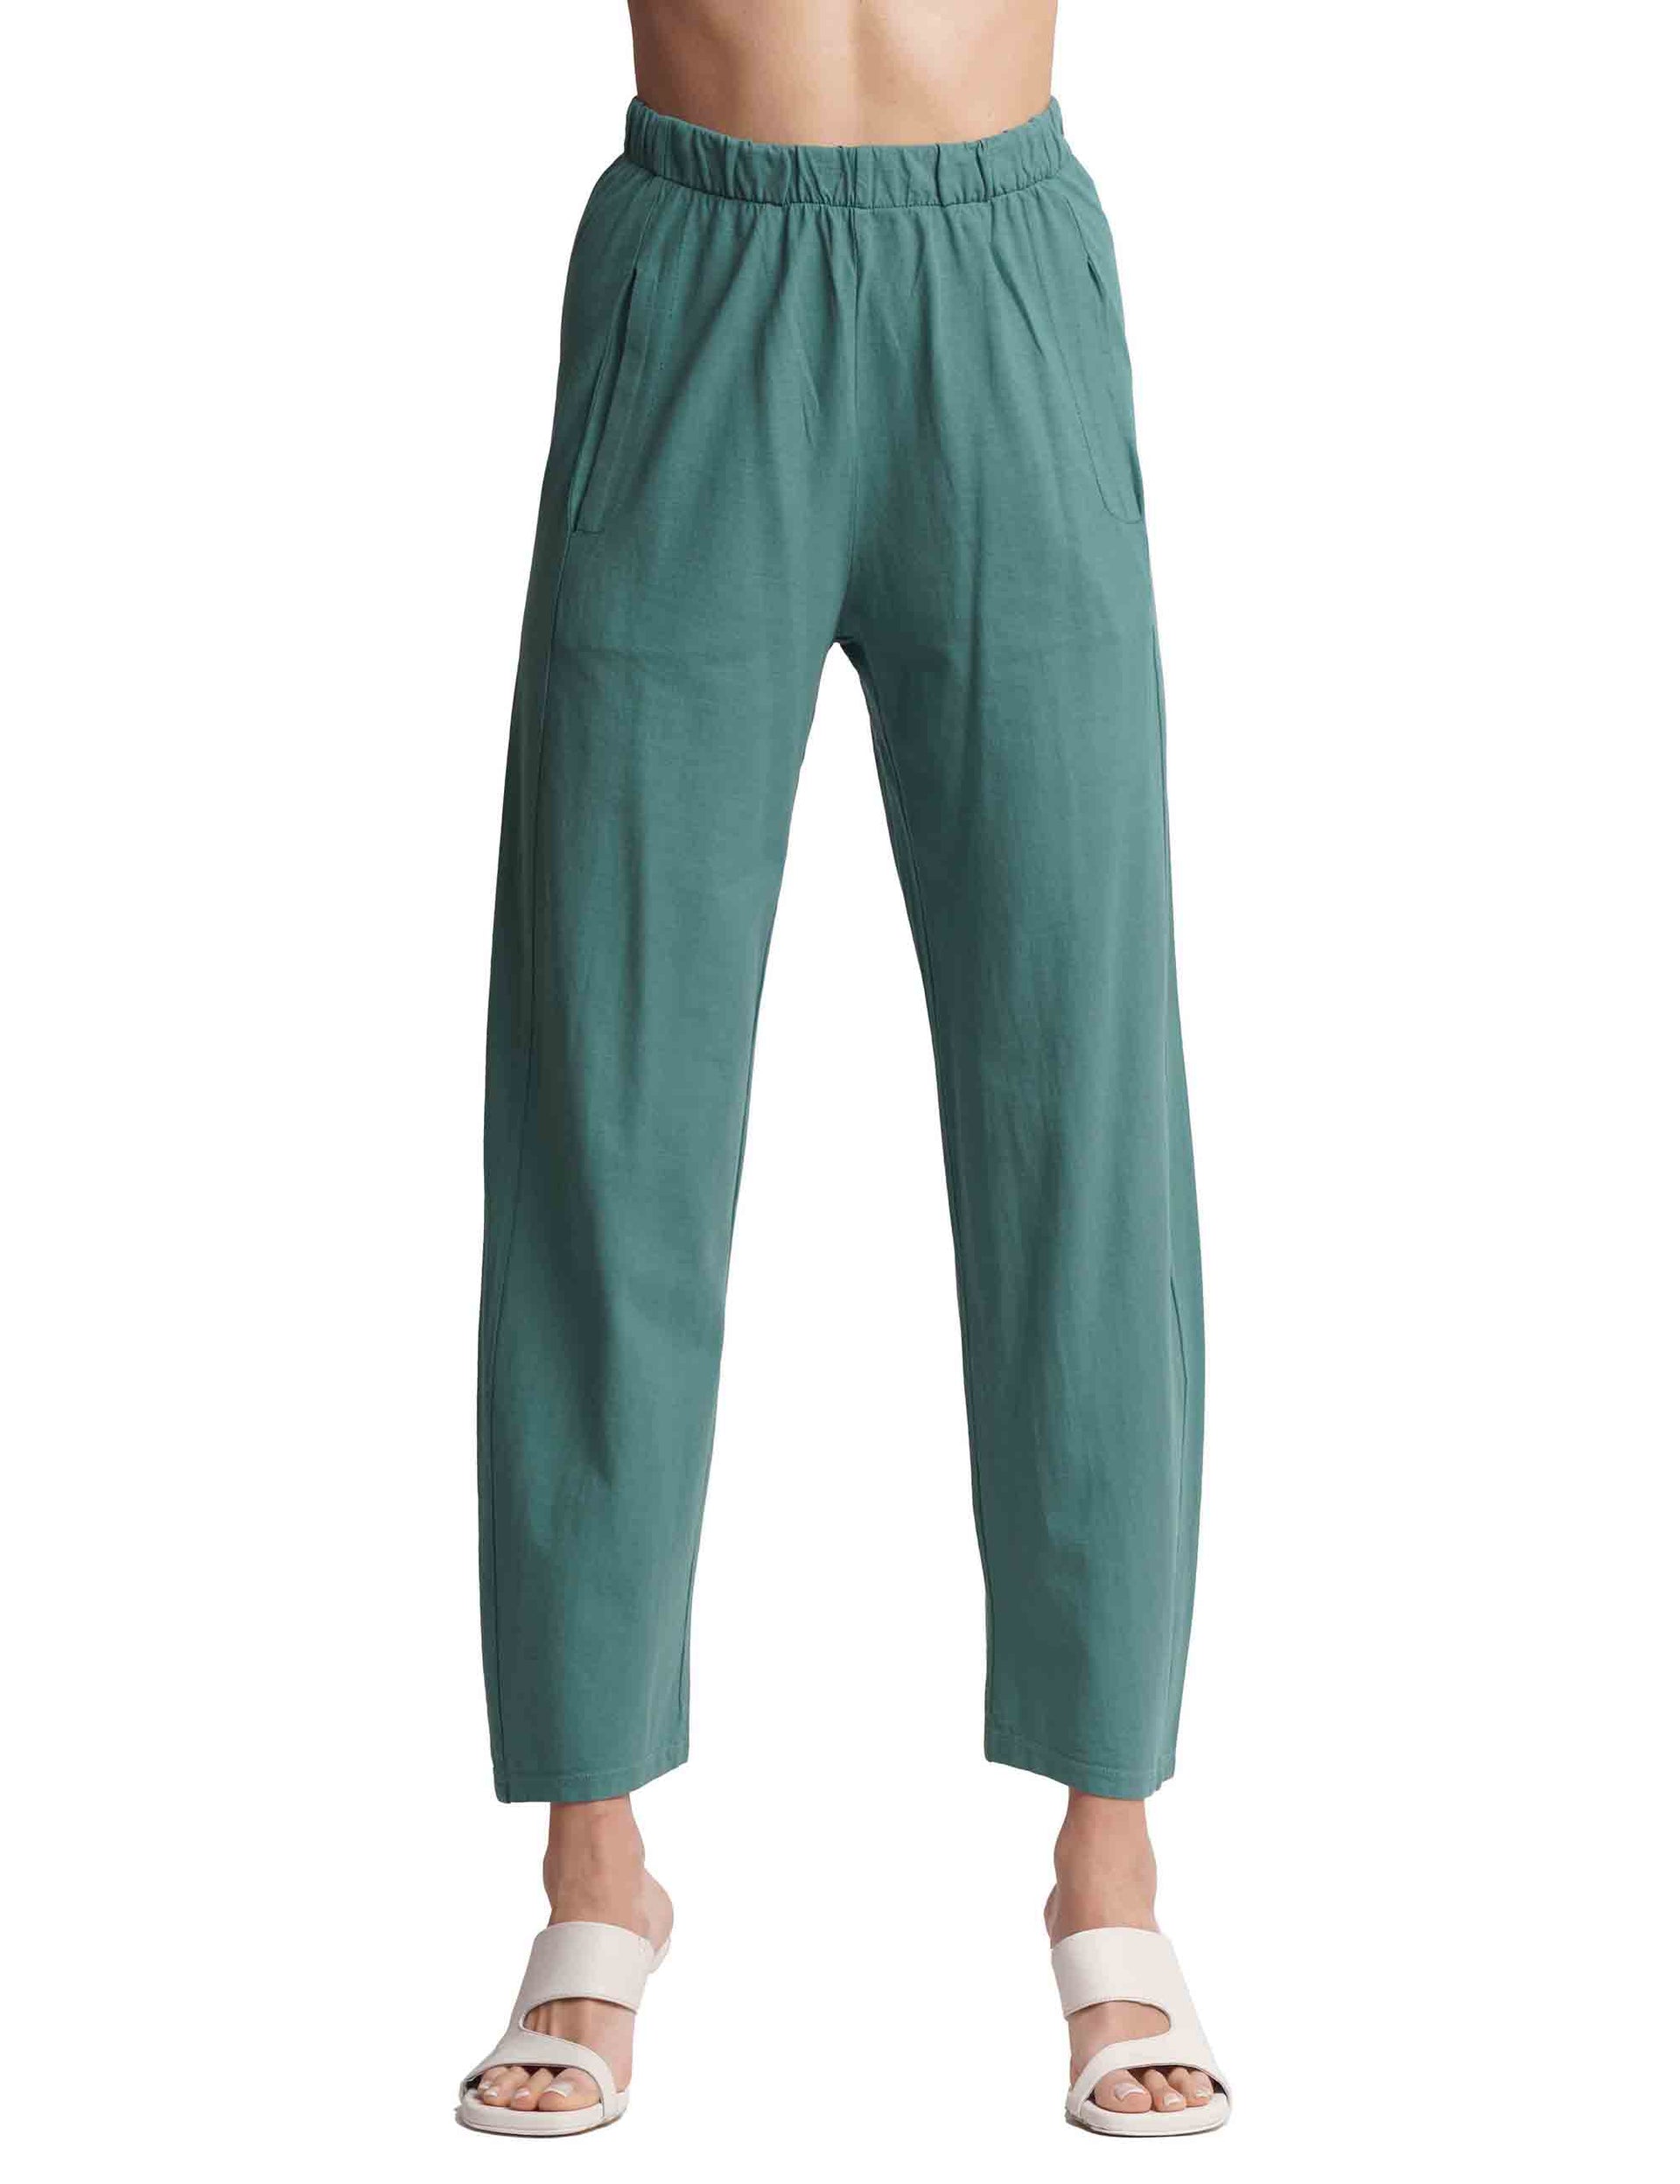 Women's green cotton trousers with elastic waist and French pockets